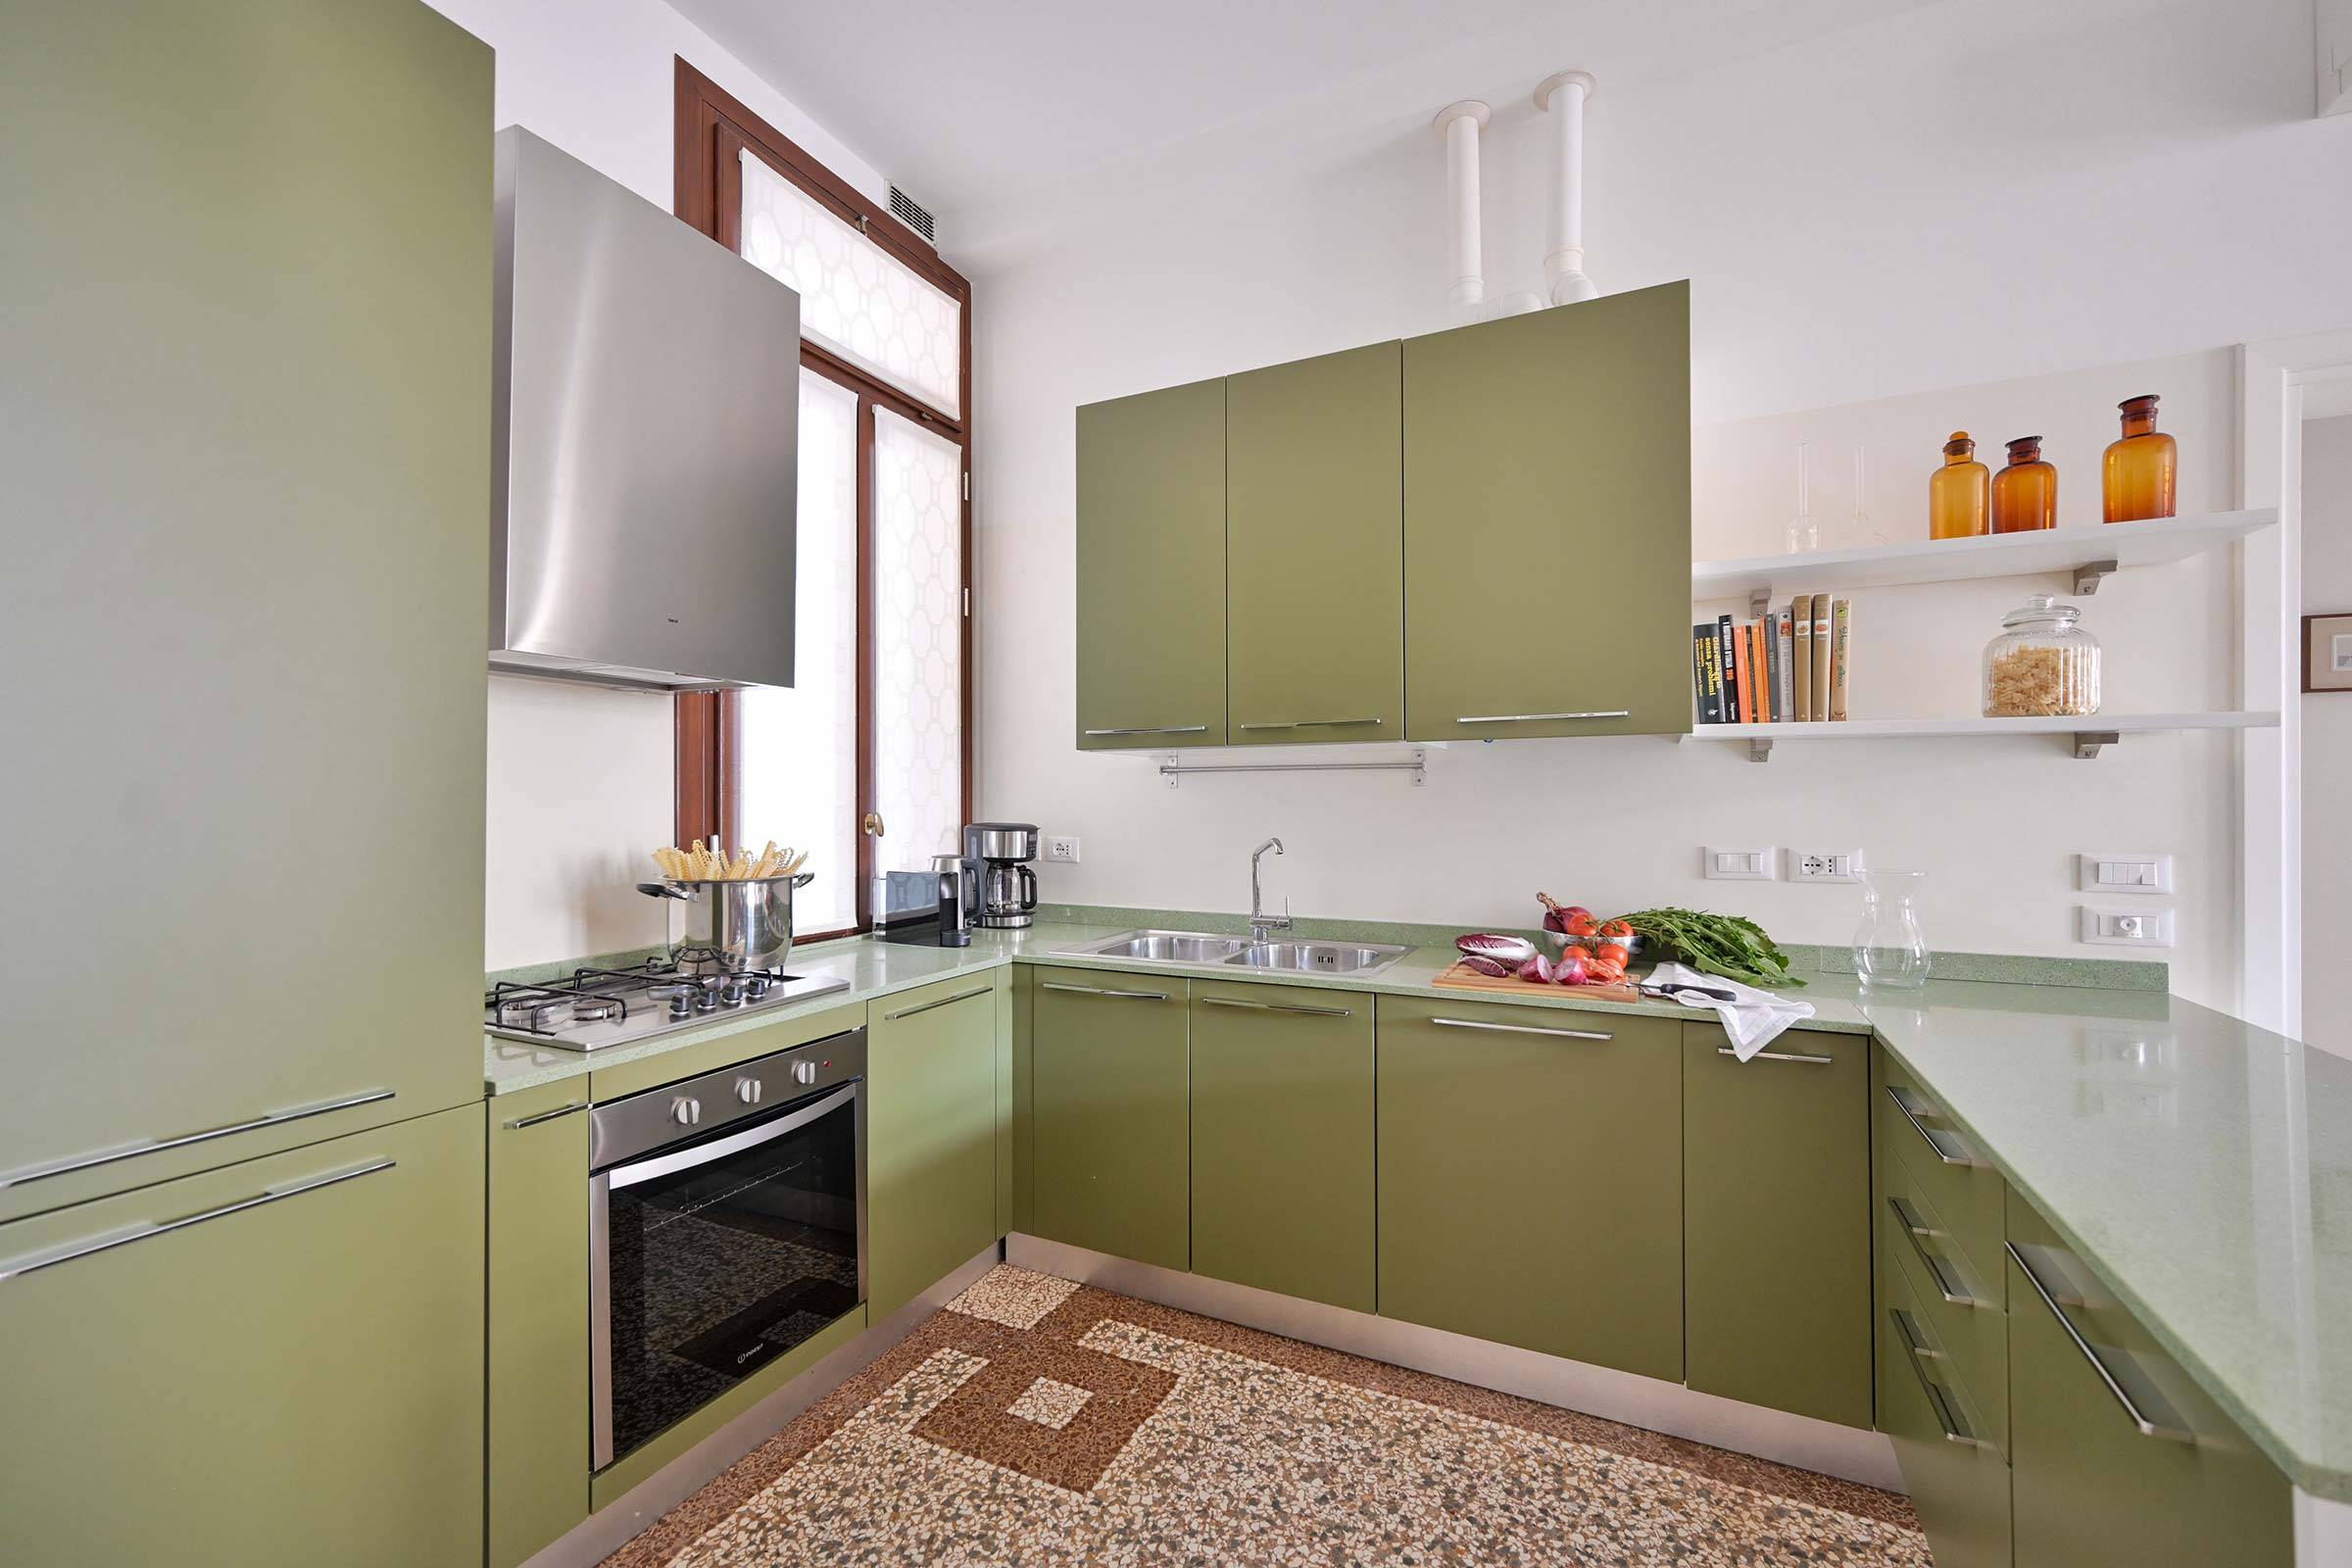 spacious and functional kitchen